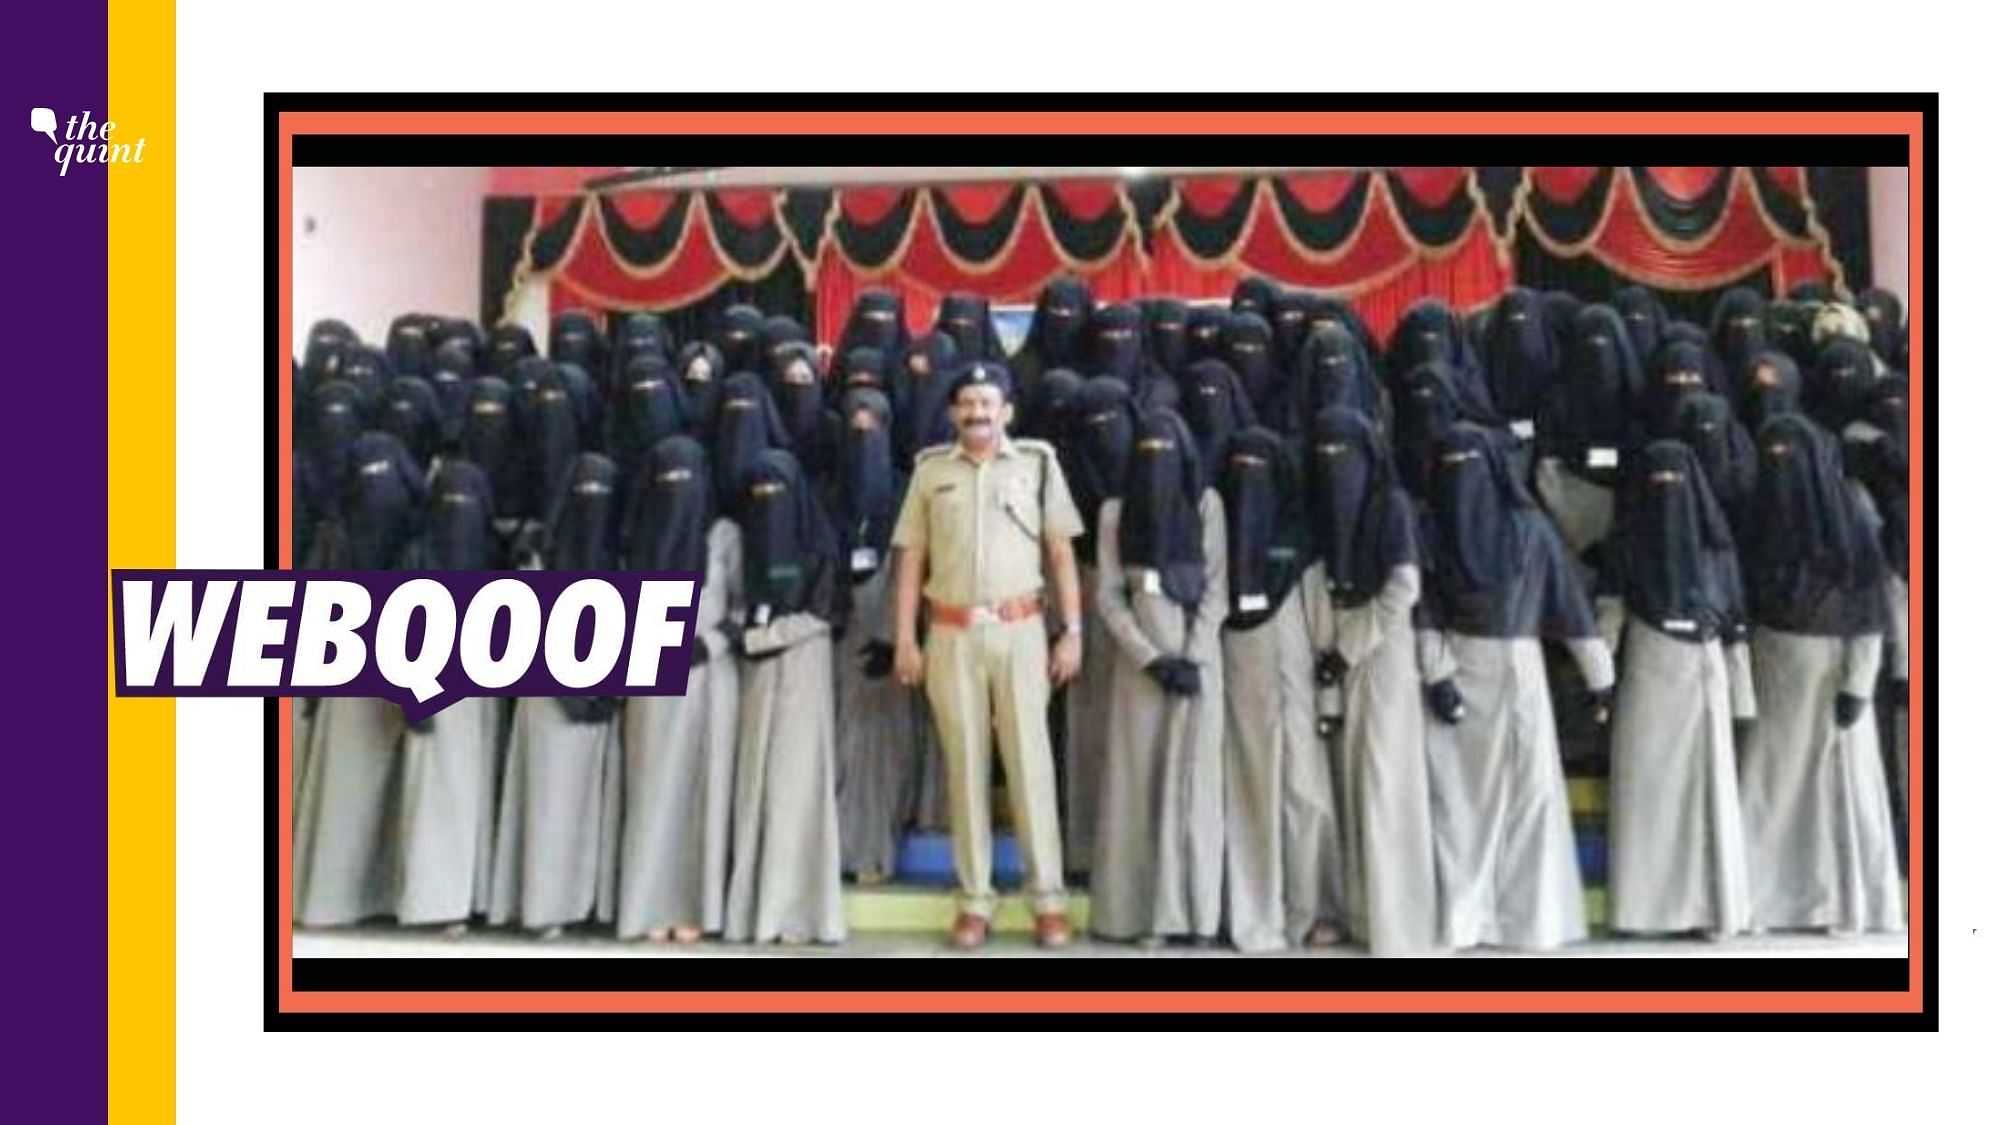 The image shows students from an Arabic college at Uliyathaduka in Kerala.